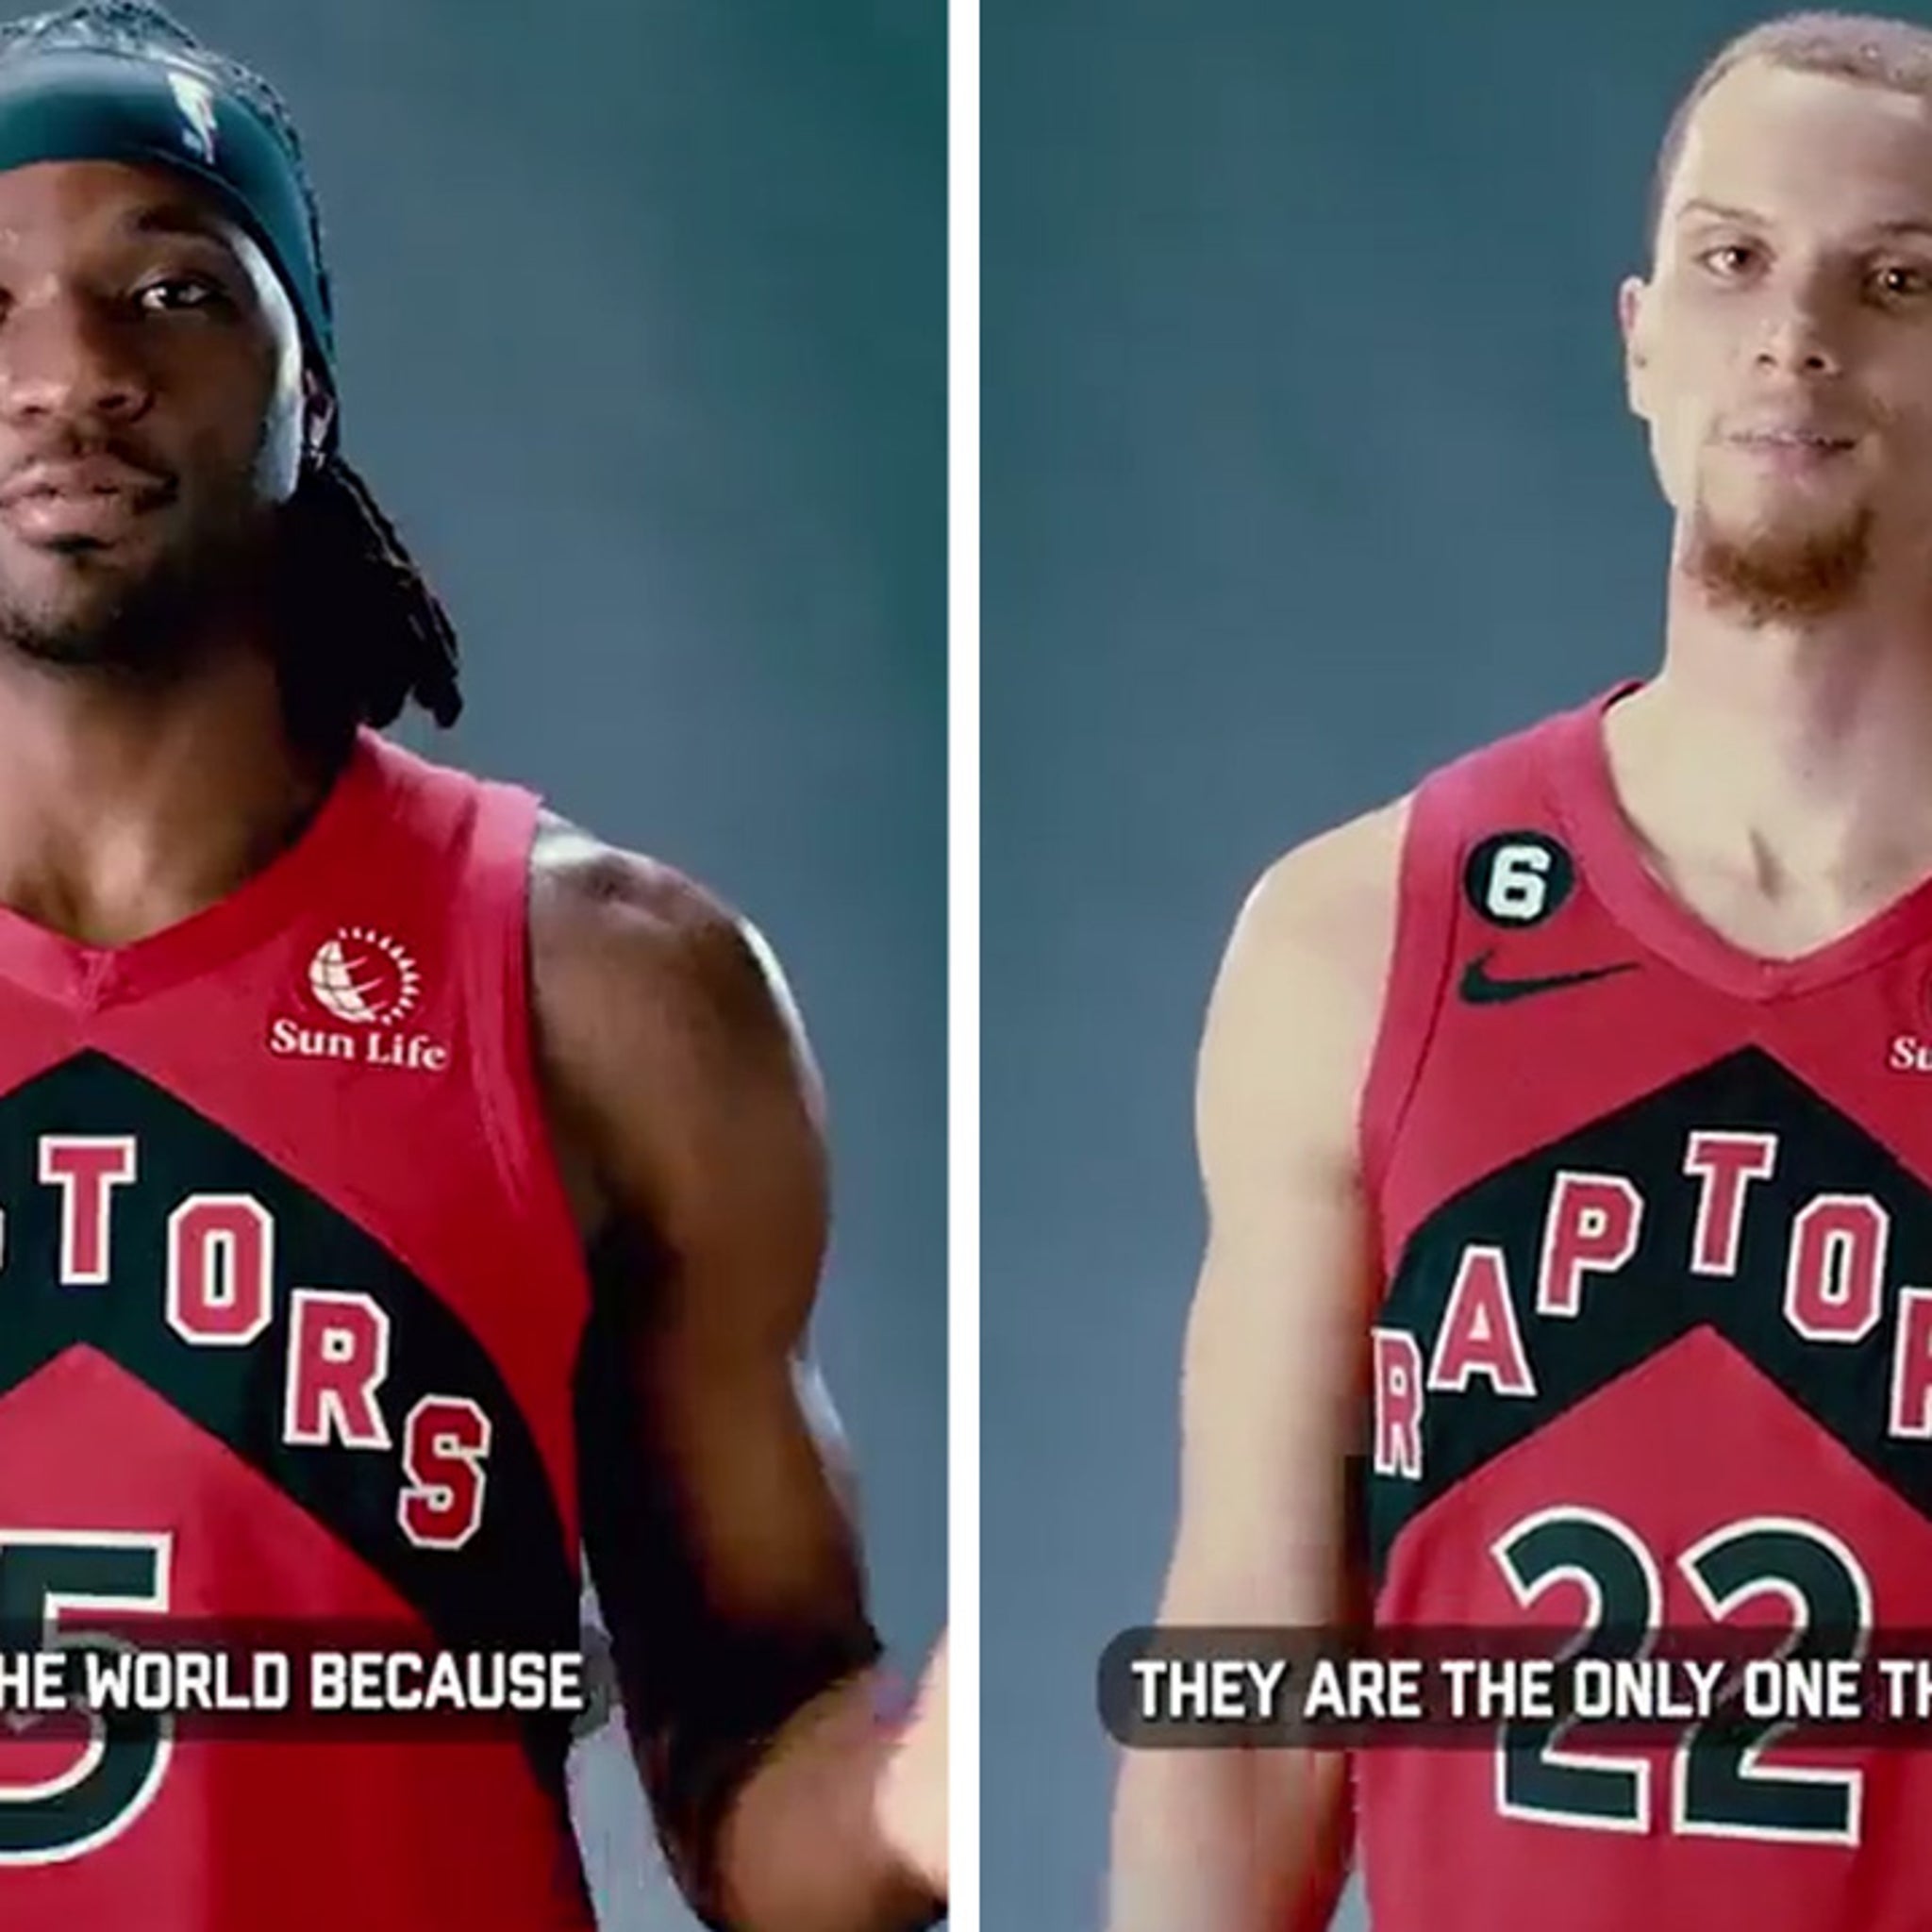 Raptors video on Women's History Month goes horribly wrong